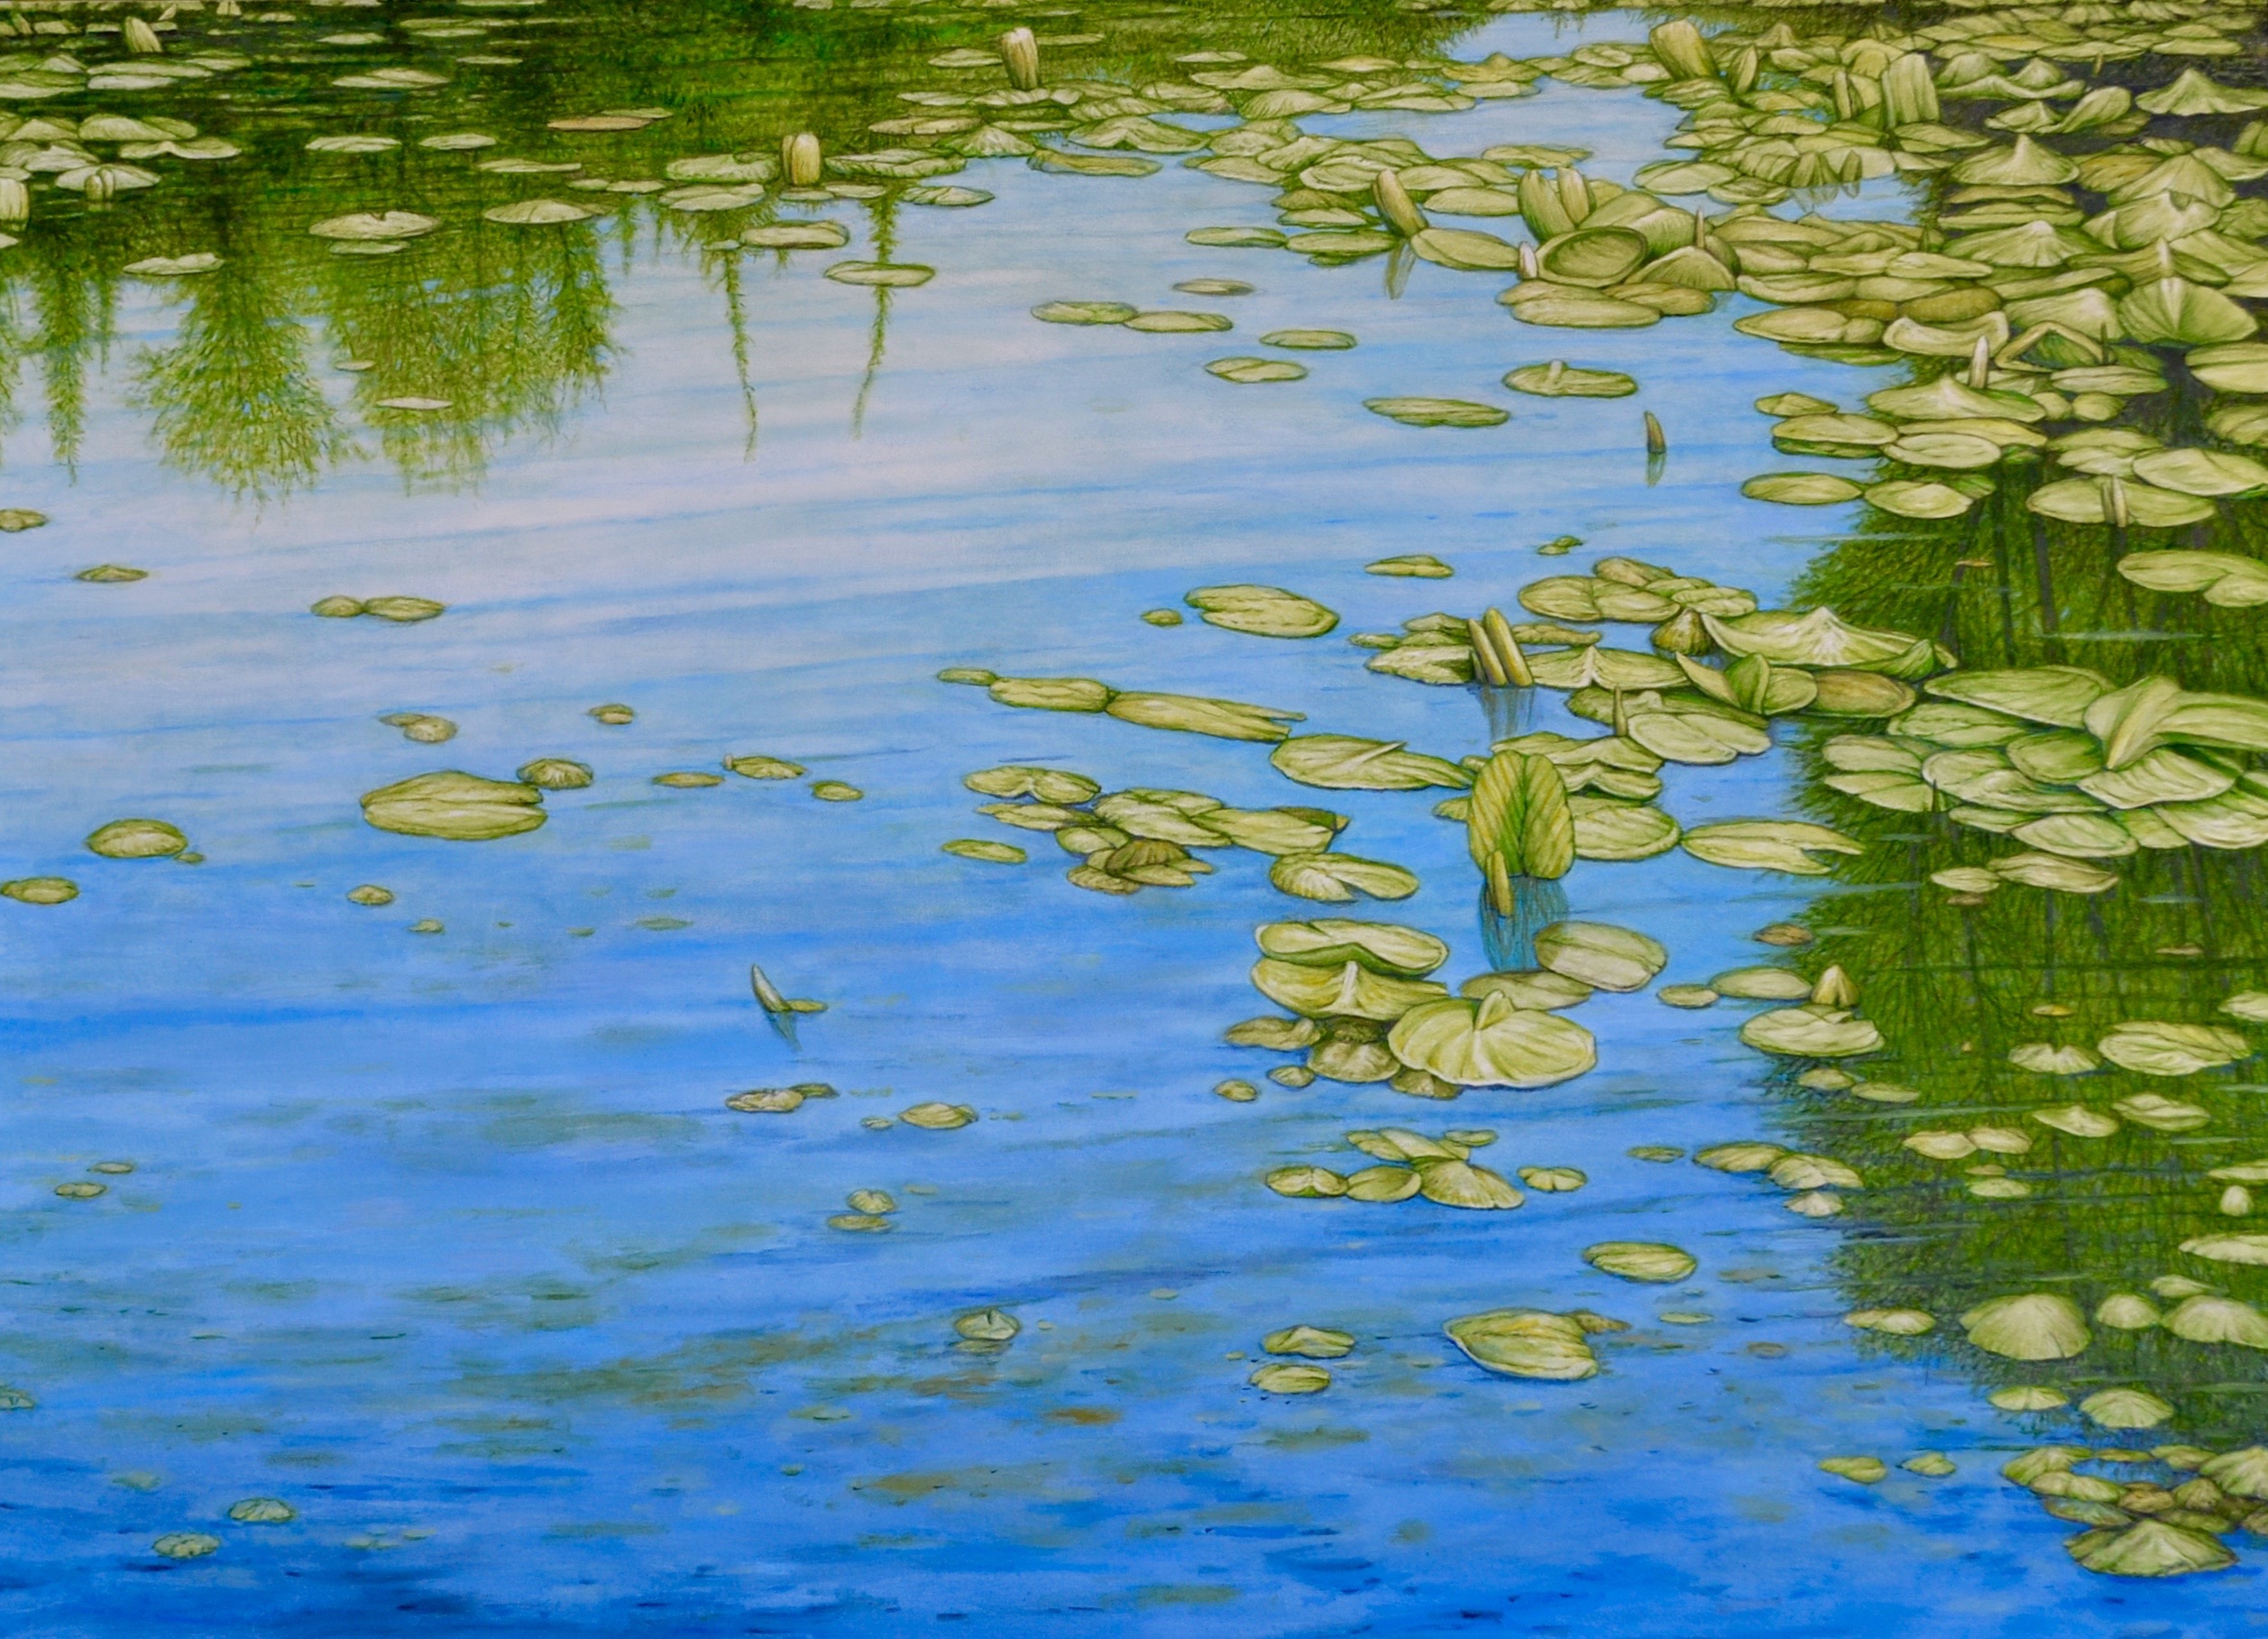 LILLY POND #4, 30 x 42 inches, oil on canvas